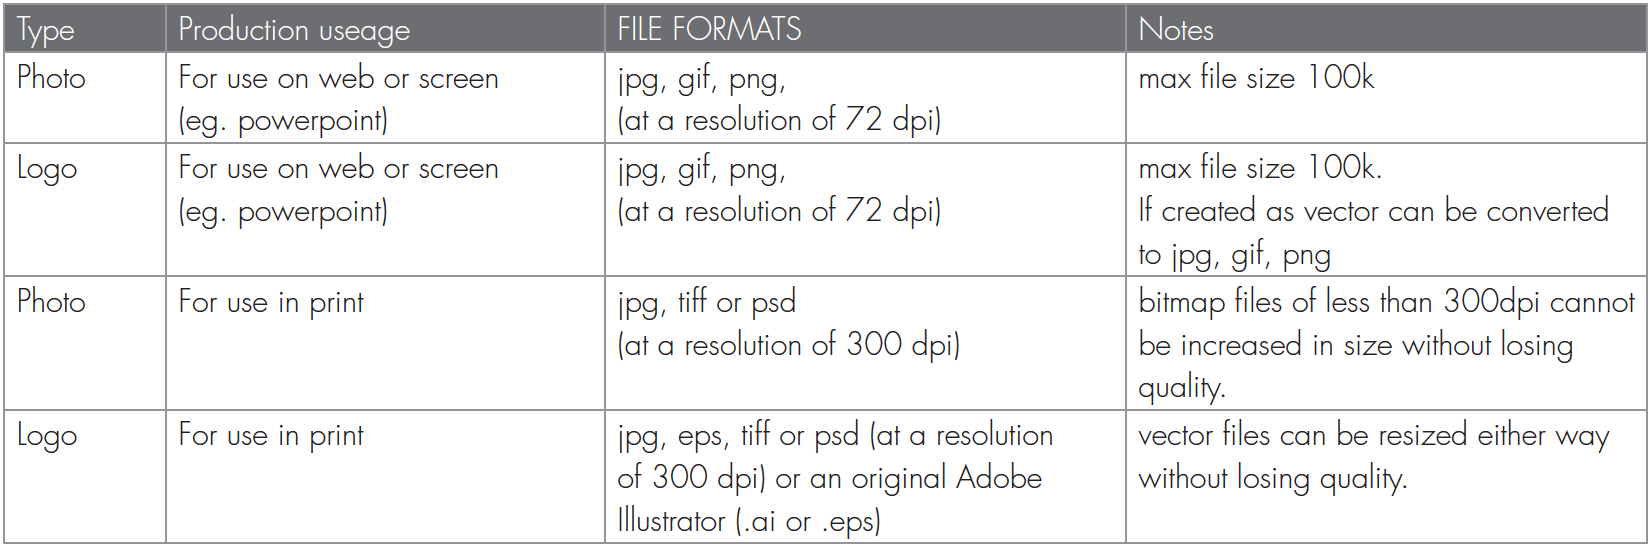 Table of image resolution usage.